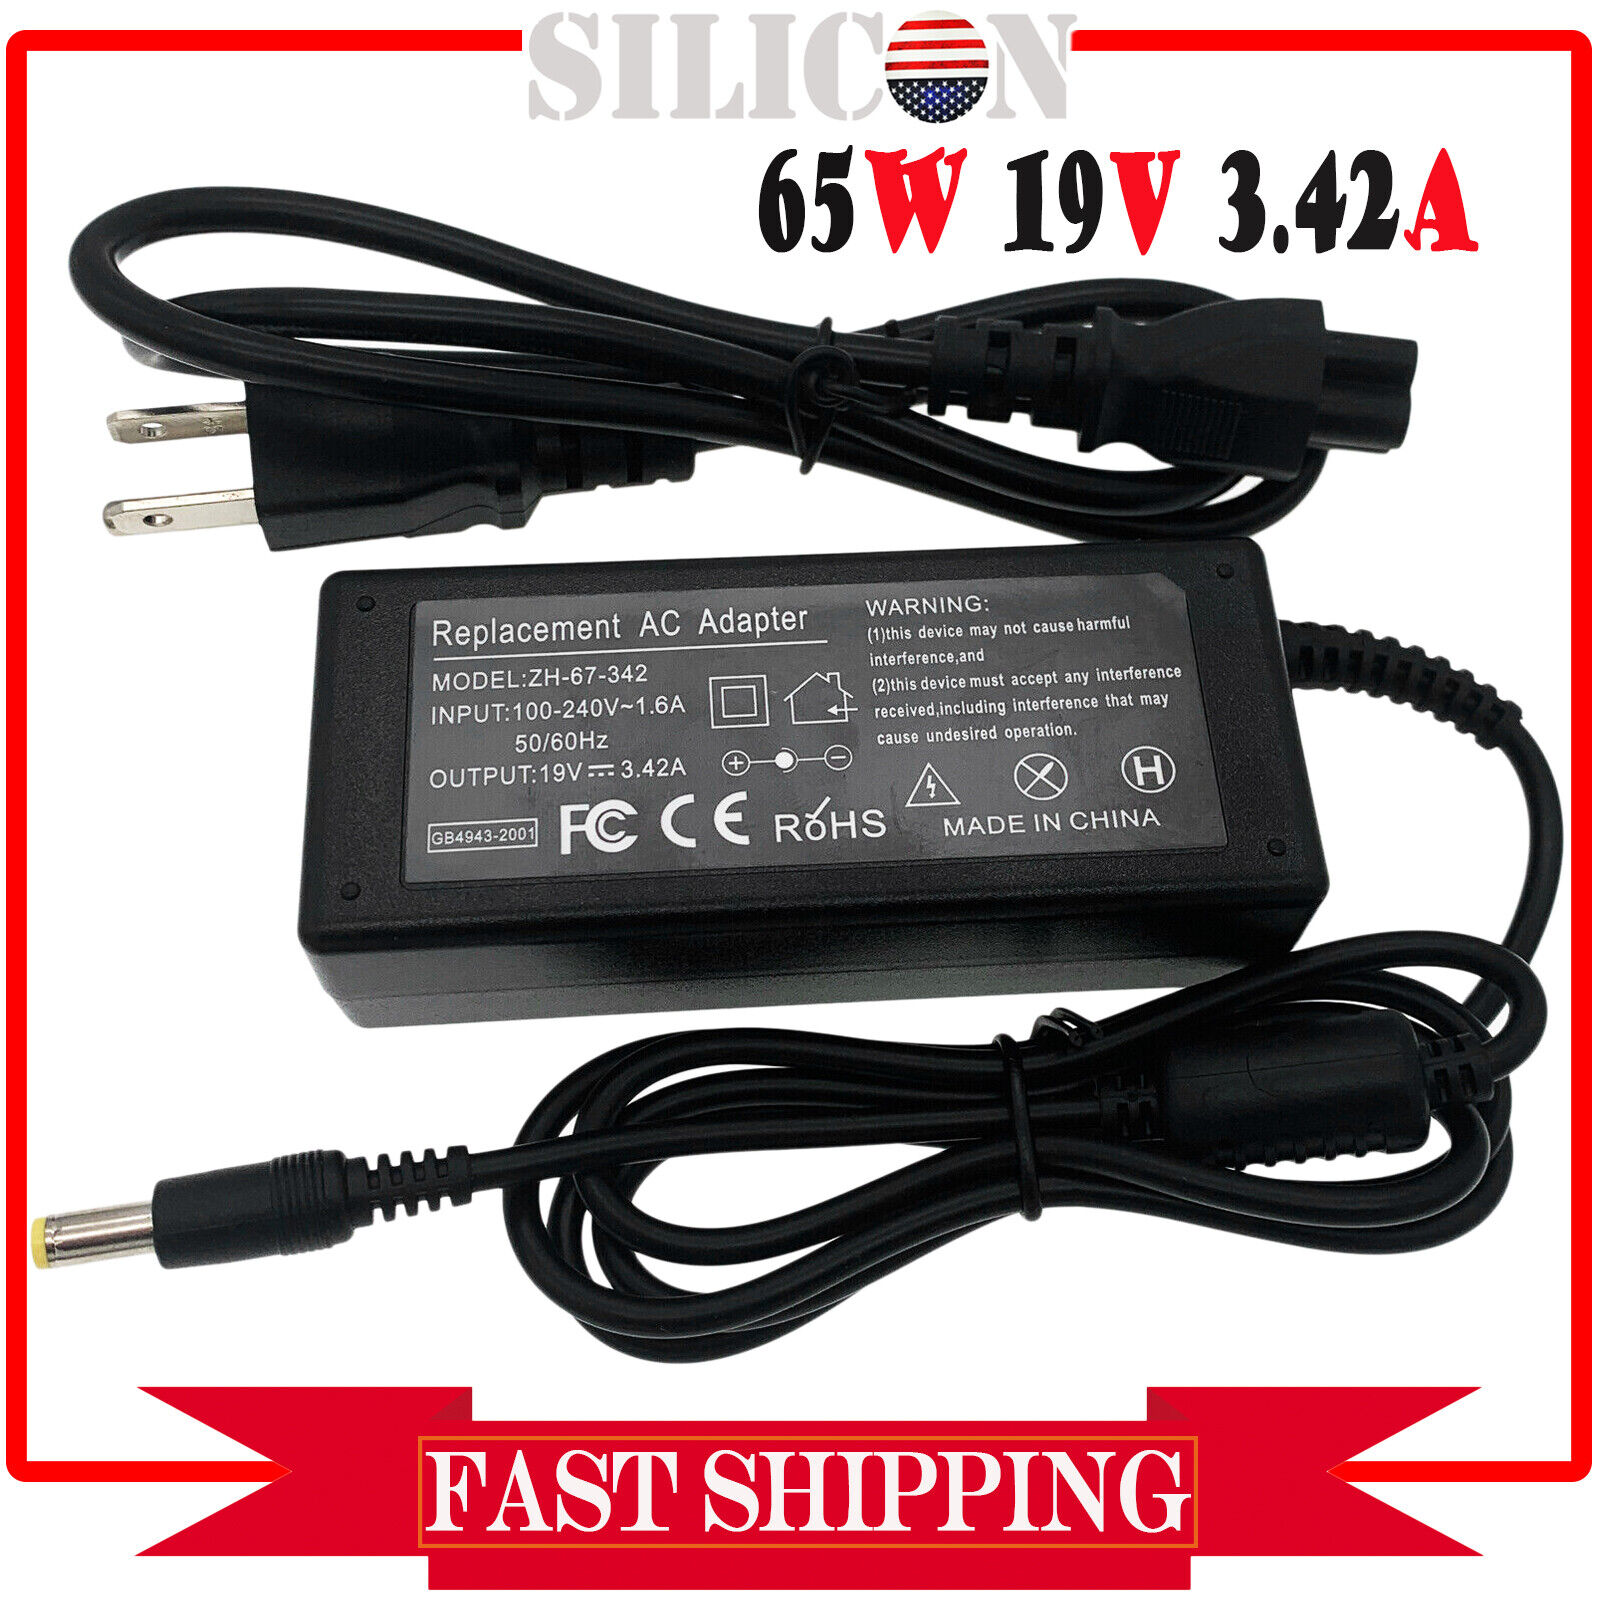 For Acer Aspire ZC-700G AiO Desktop Power Supply AC Adapter Cord Cable Charger